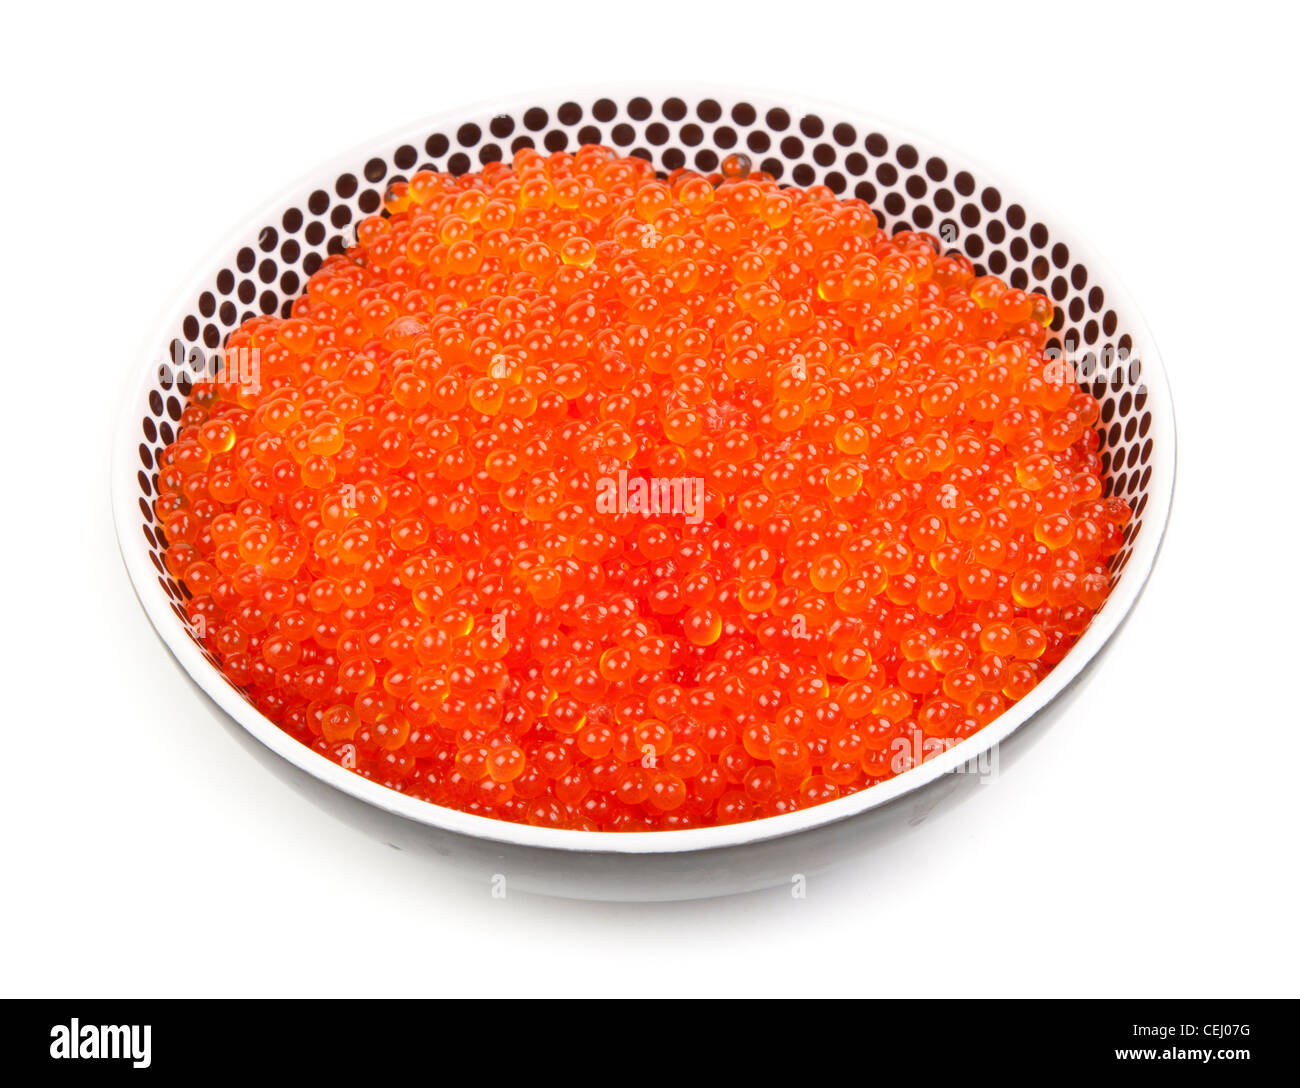 A plate full of fresh red caviar on white background Stock Photo